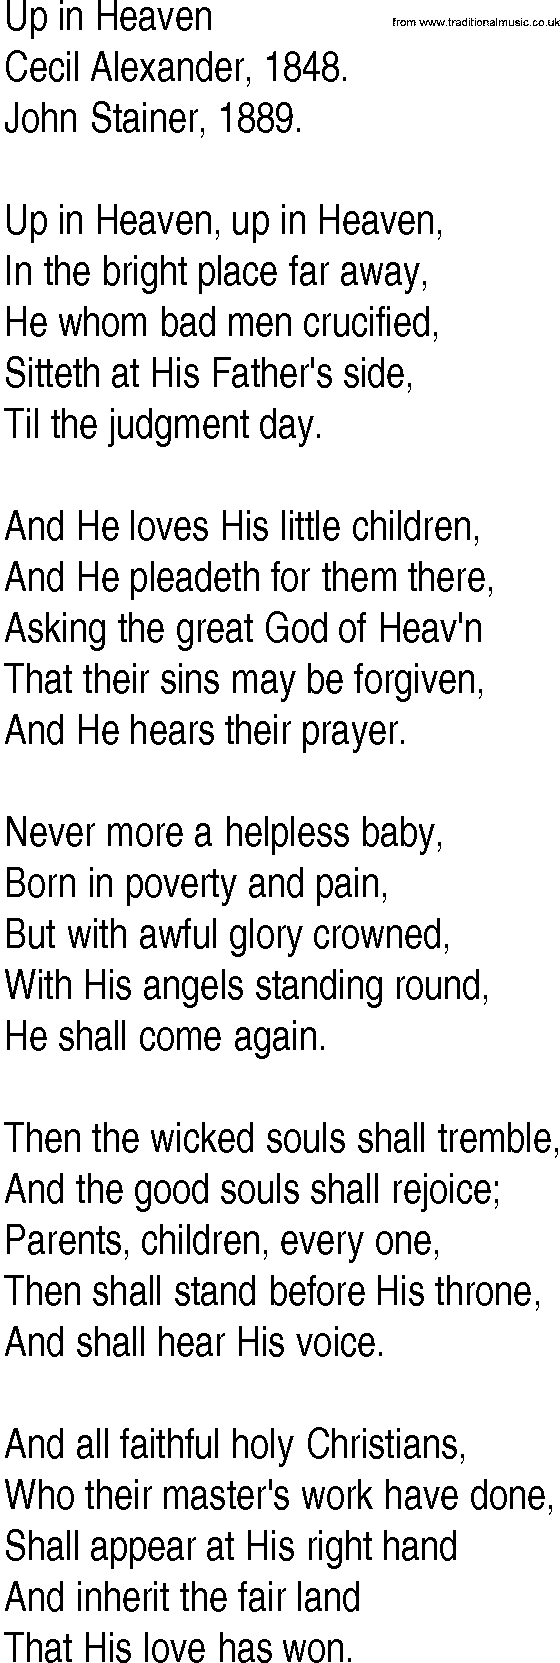 Hymn and Gospel Song: Up in Heaven by Cecil Alexander lyrics